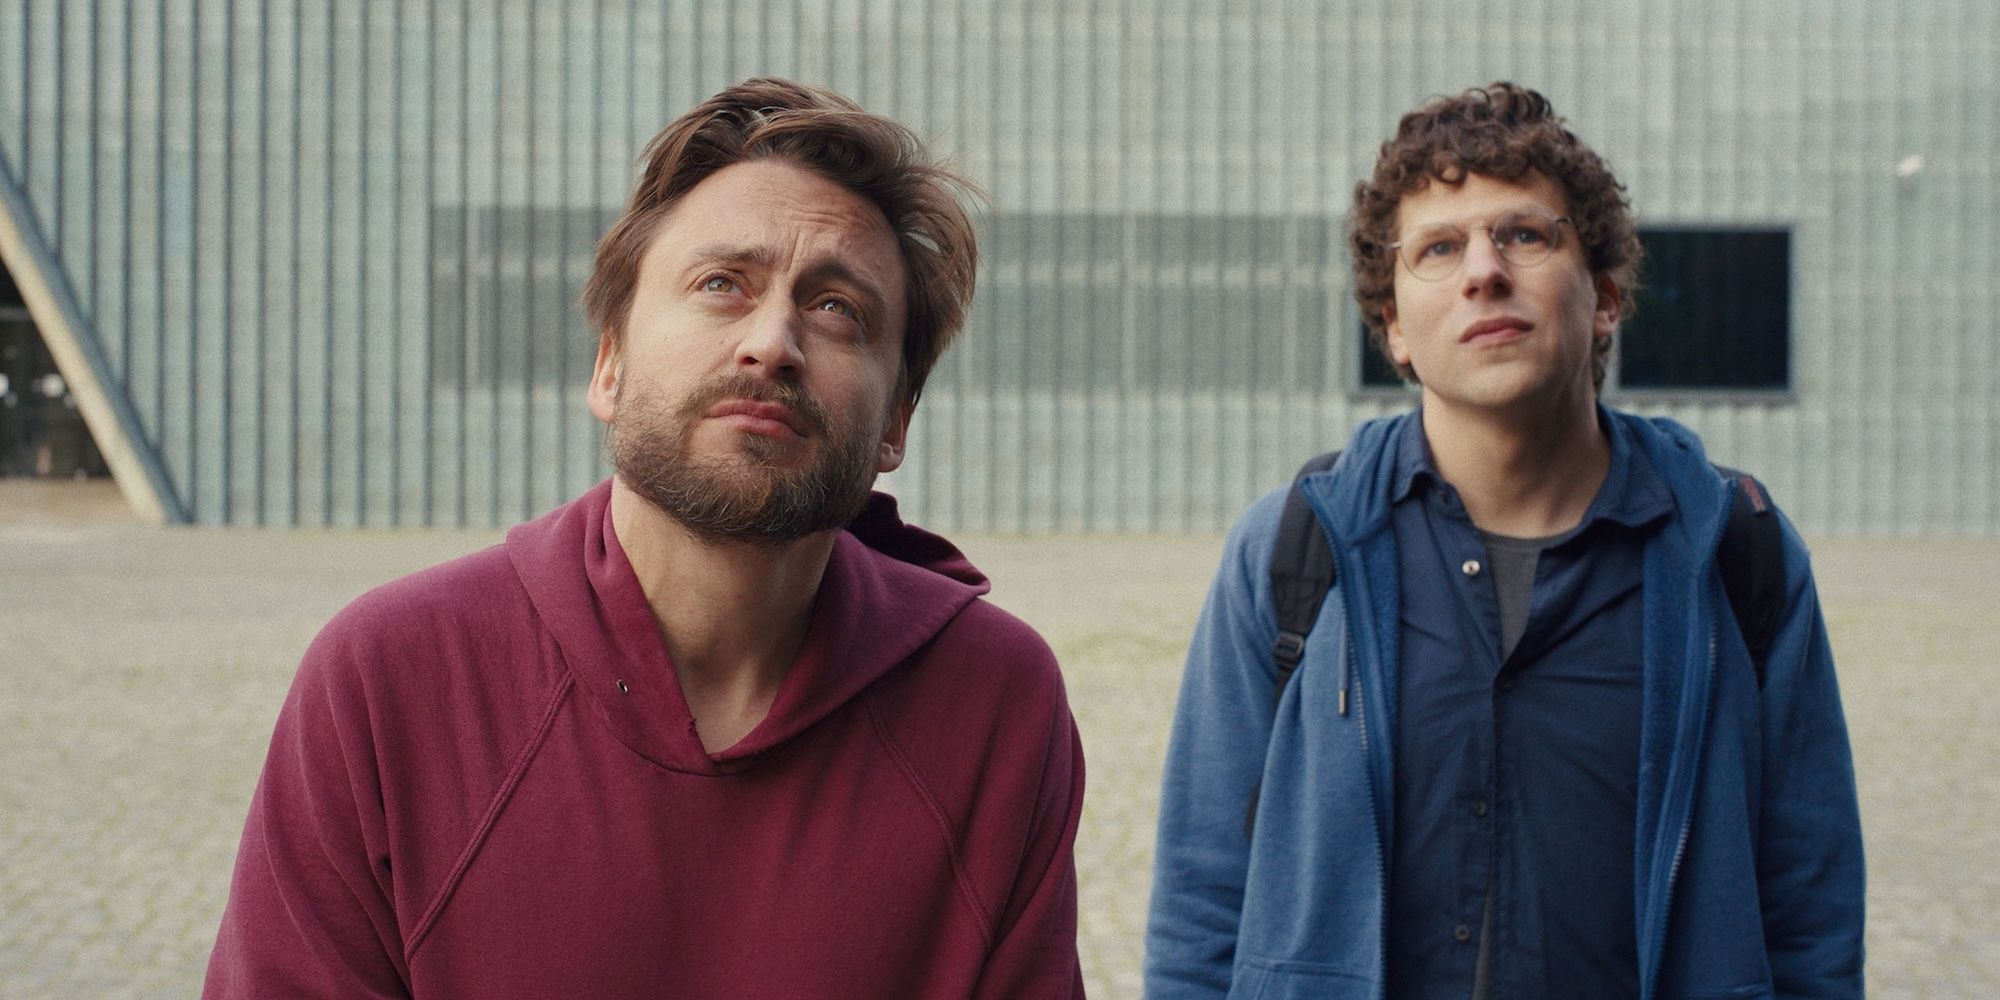 Kieran Culkin and Jesse Eisenberg stare up at a statue in Poland in A Real Pain